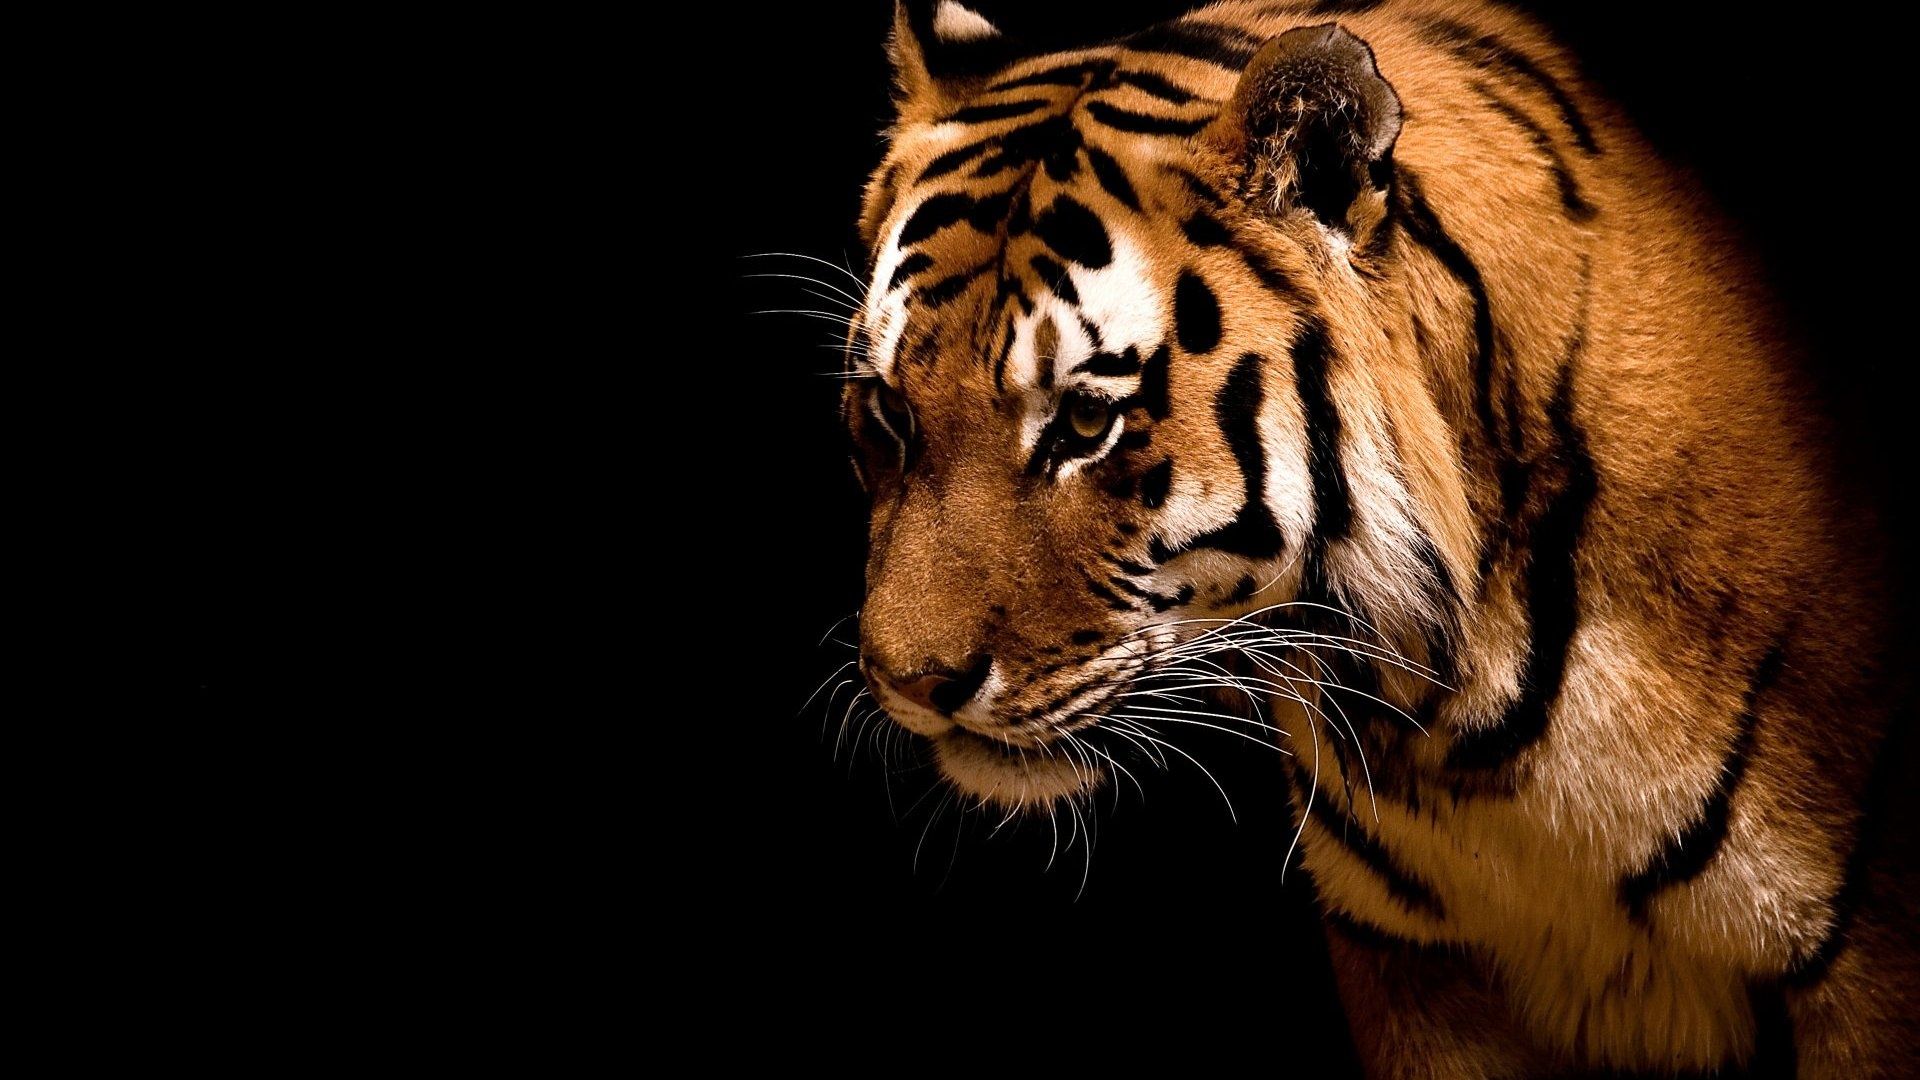 Tiger Wallpapers In HD